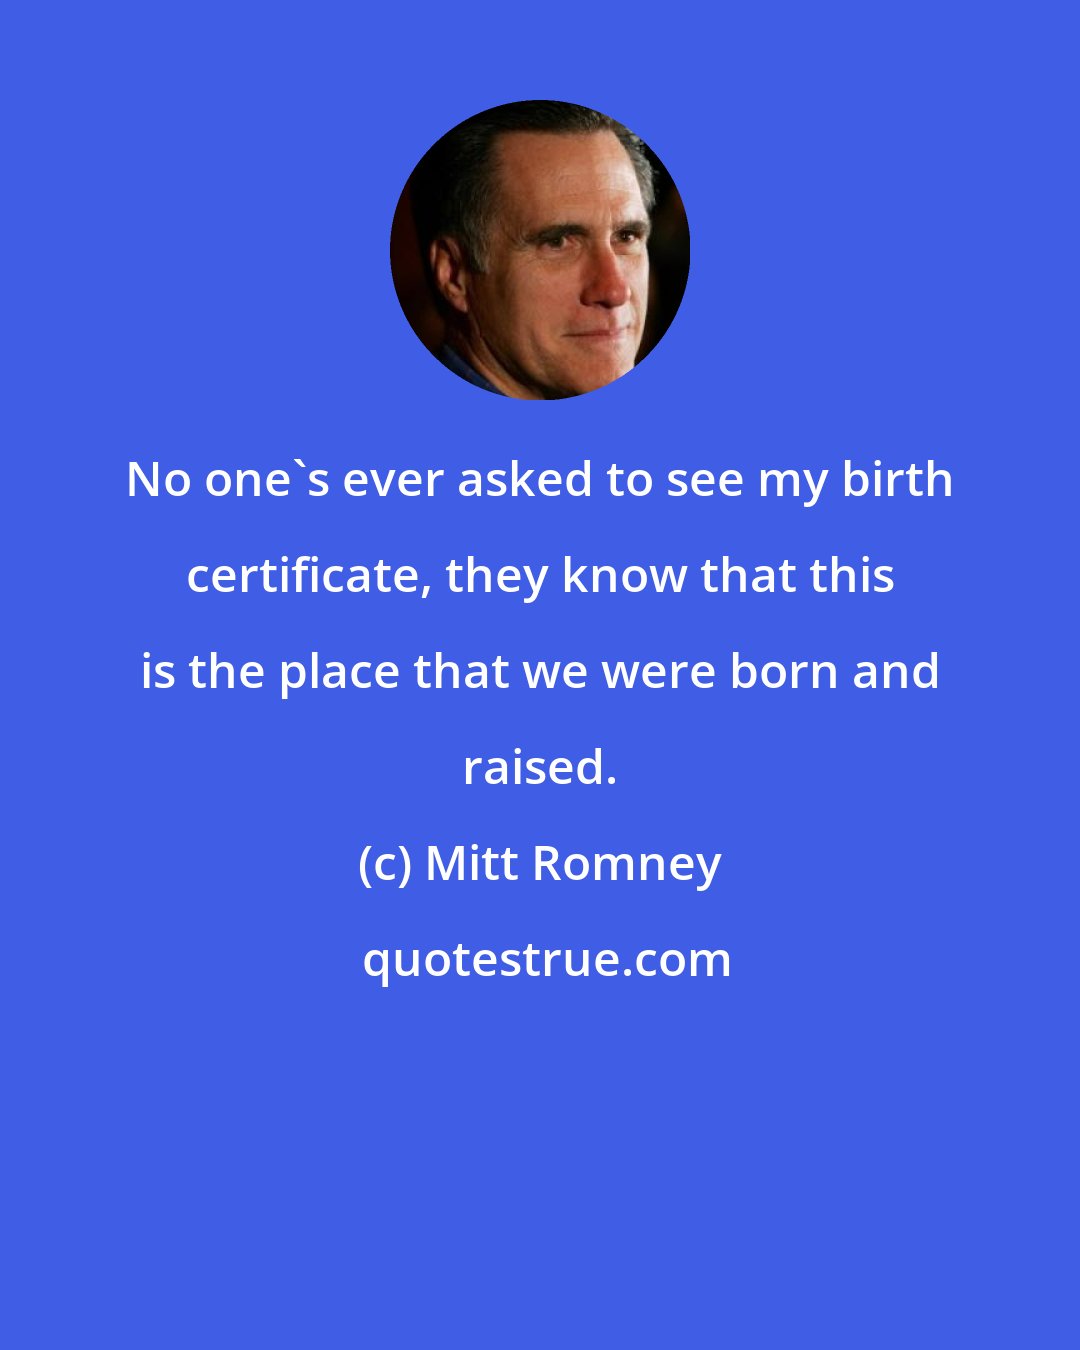 Mitt Romney: No one's ever asked to see my birth certificate, they know that this is the place that we were born and raised.